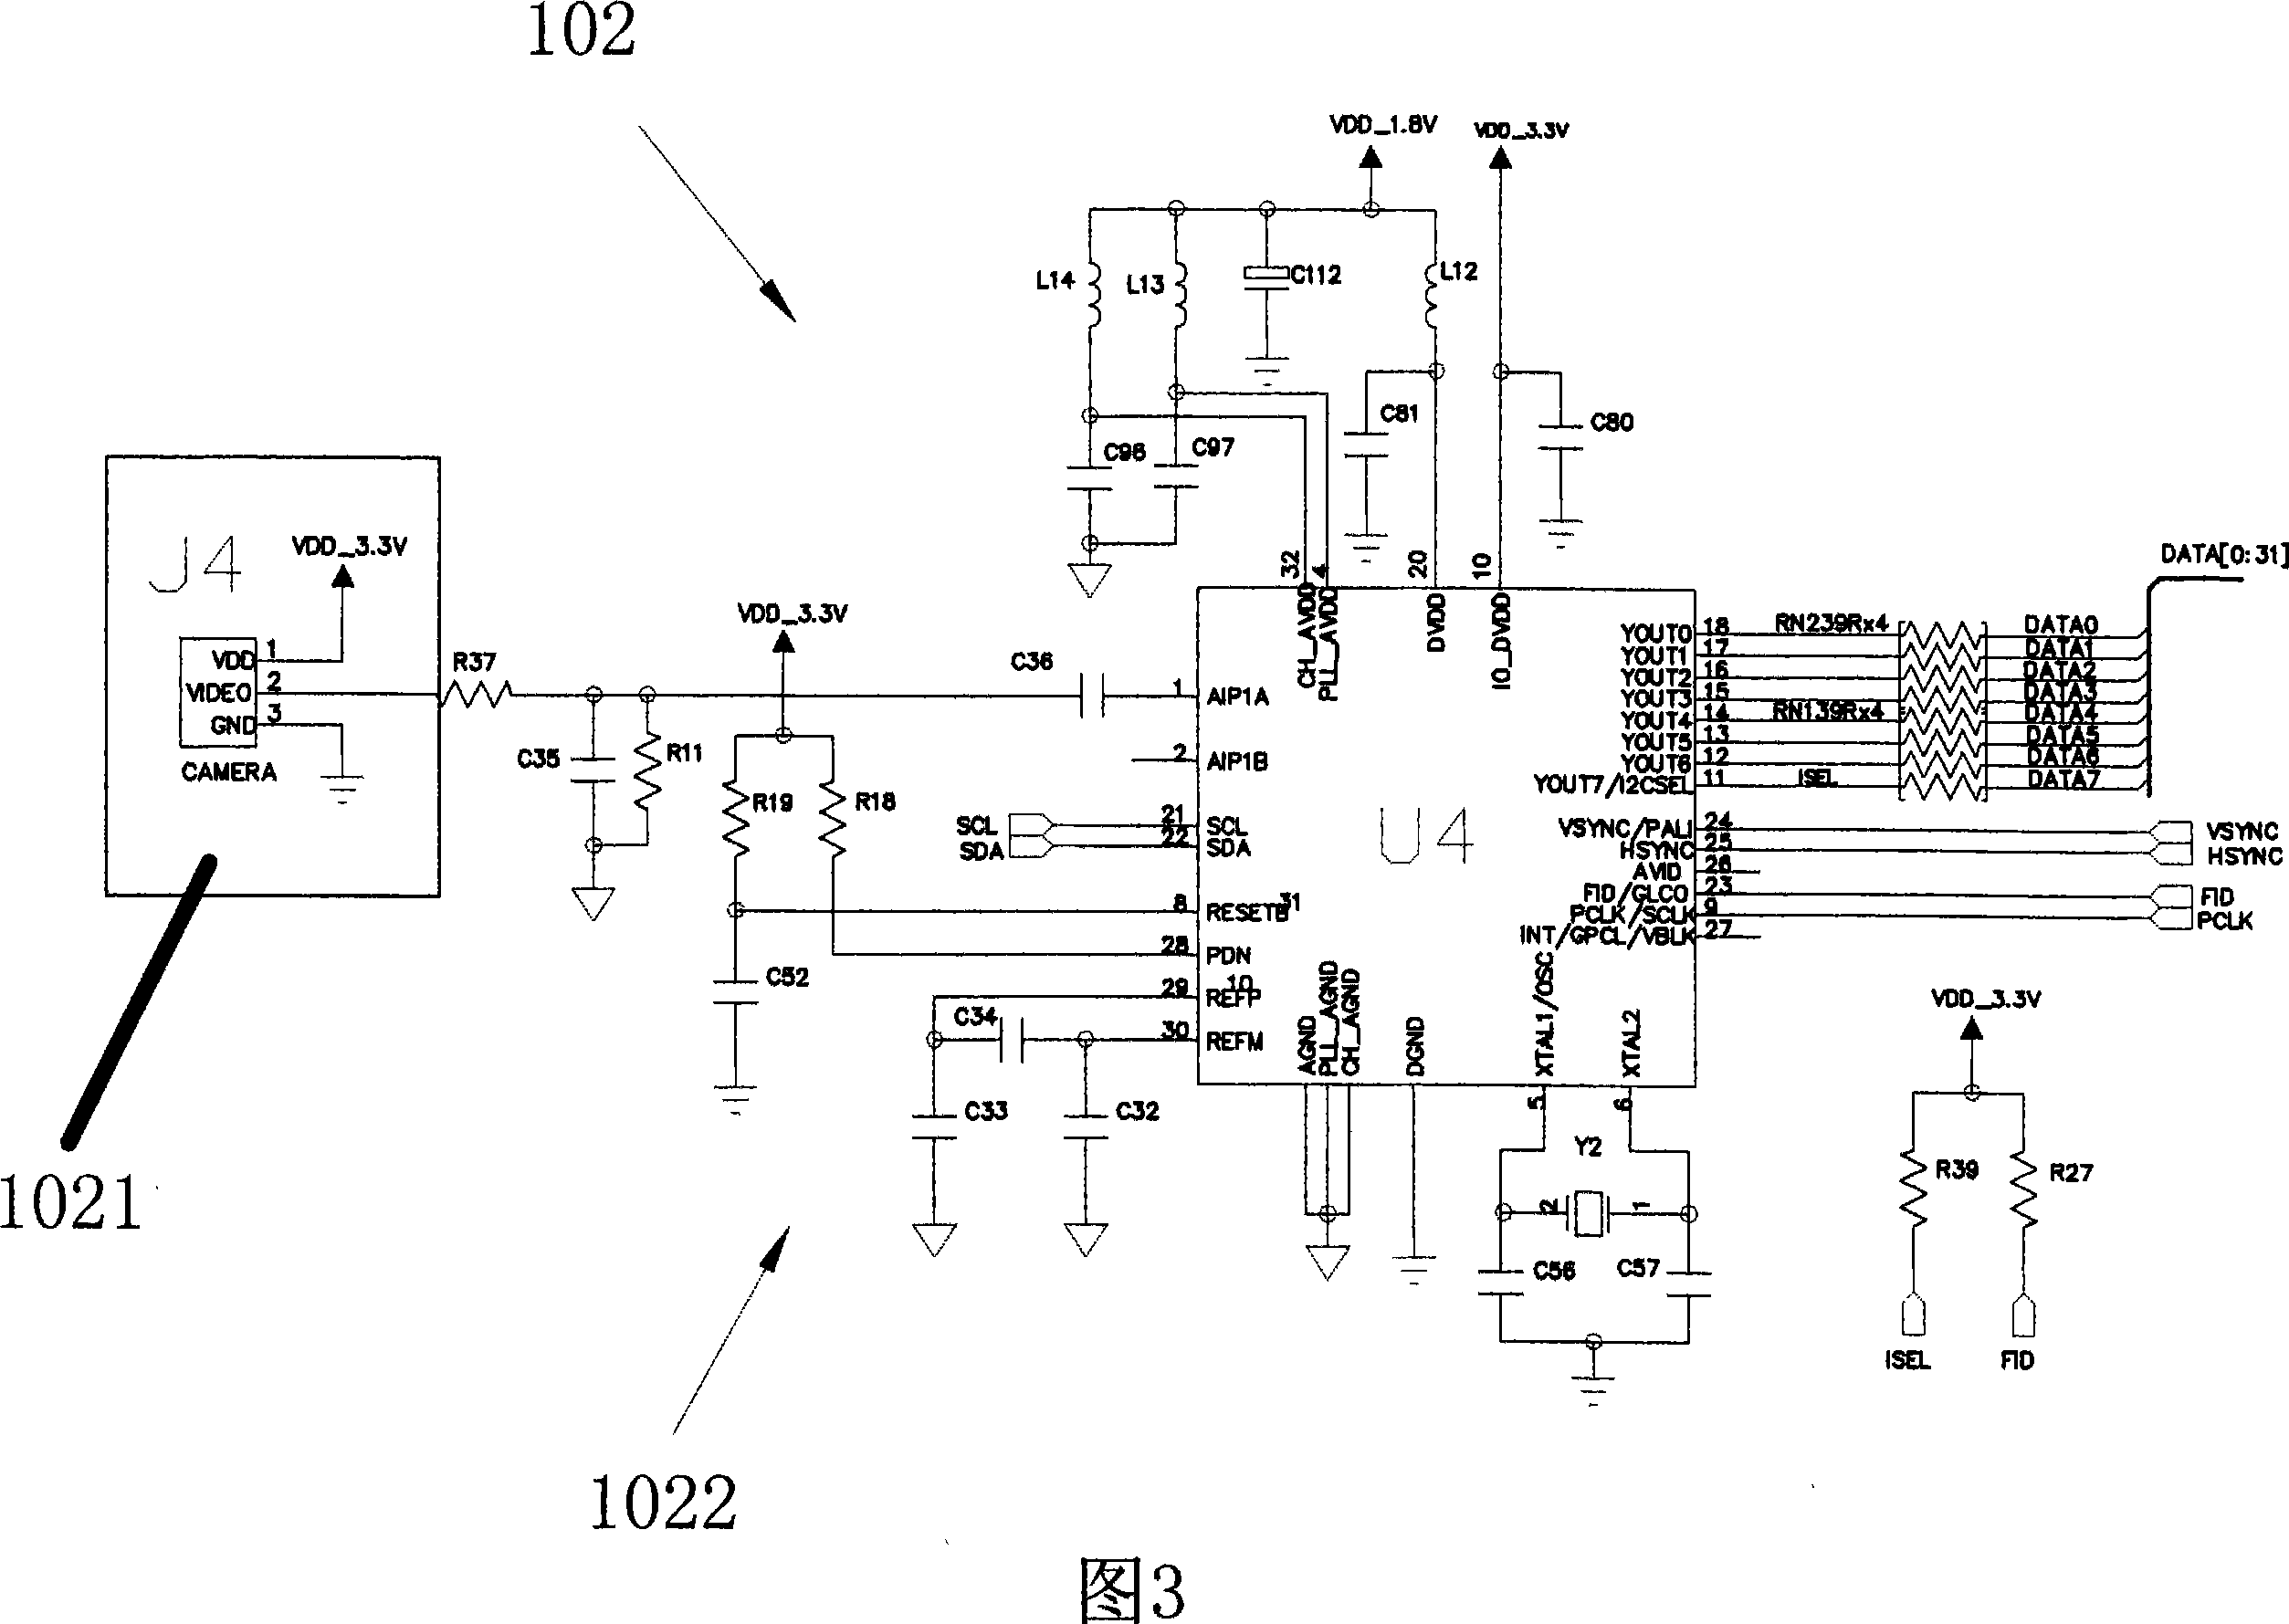 Method for active or passive examining parked car condition and its anti-theft alarm system